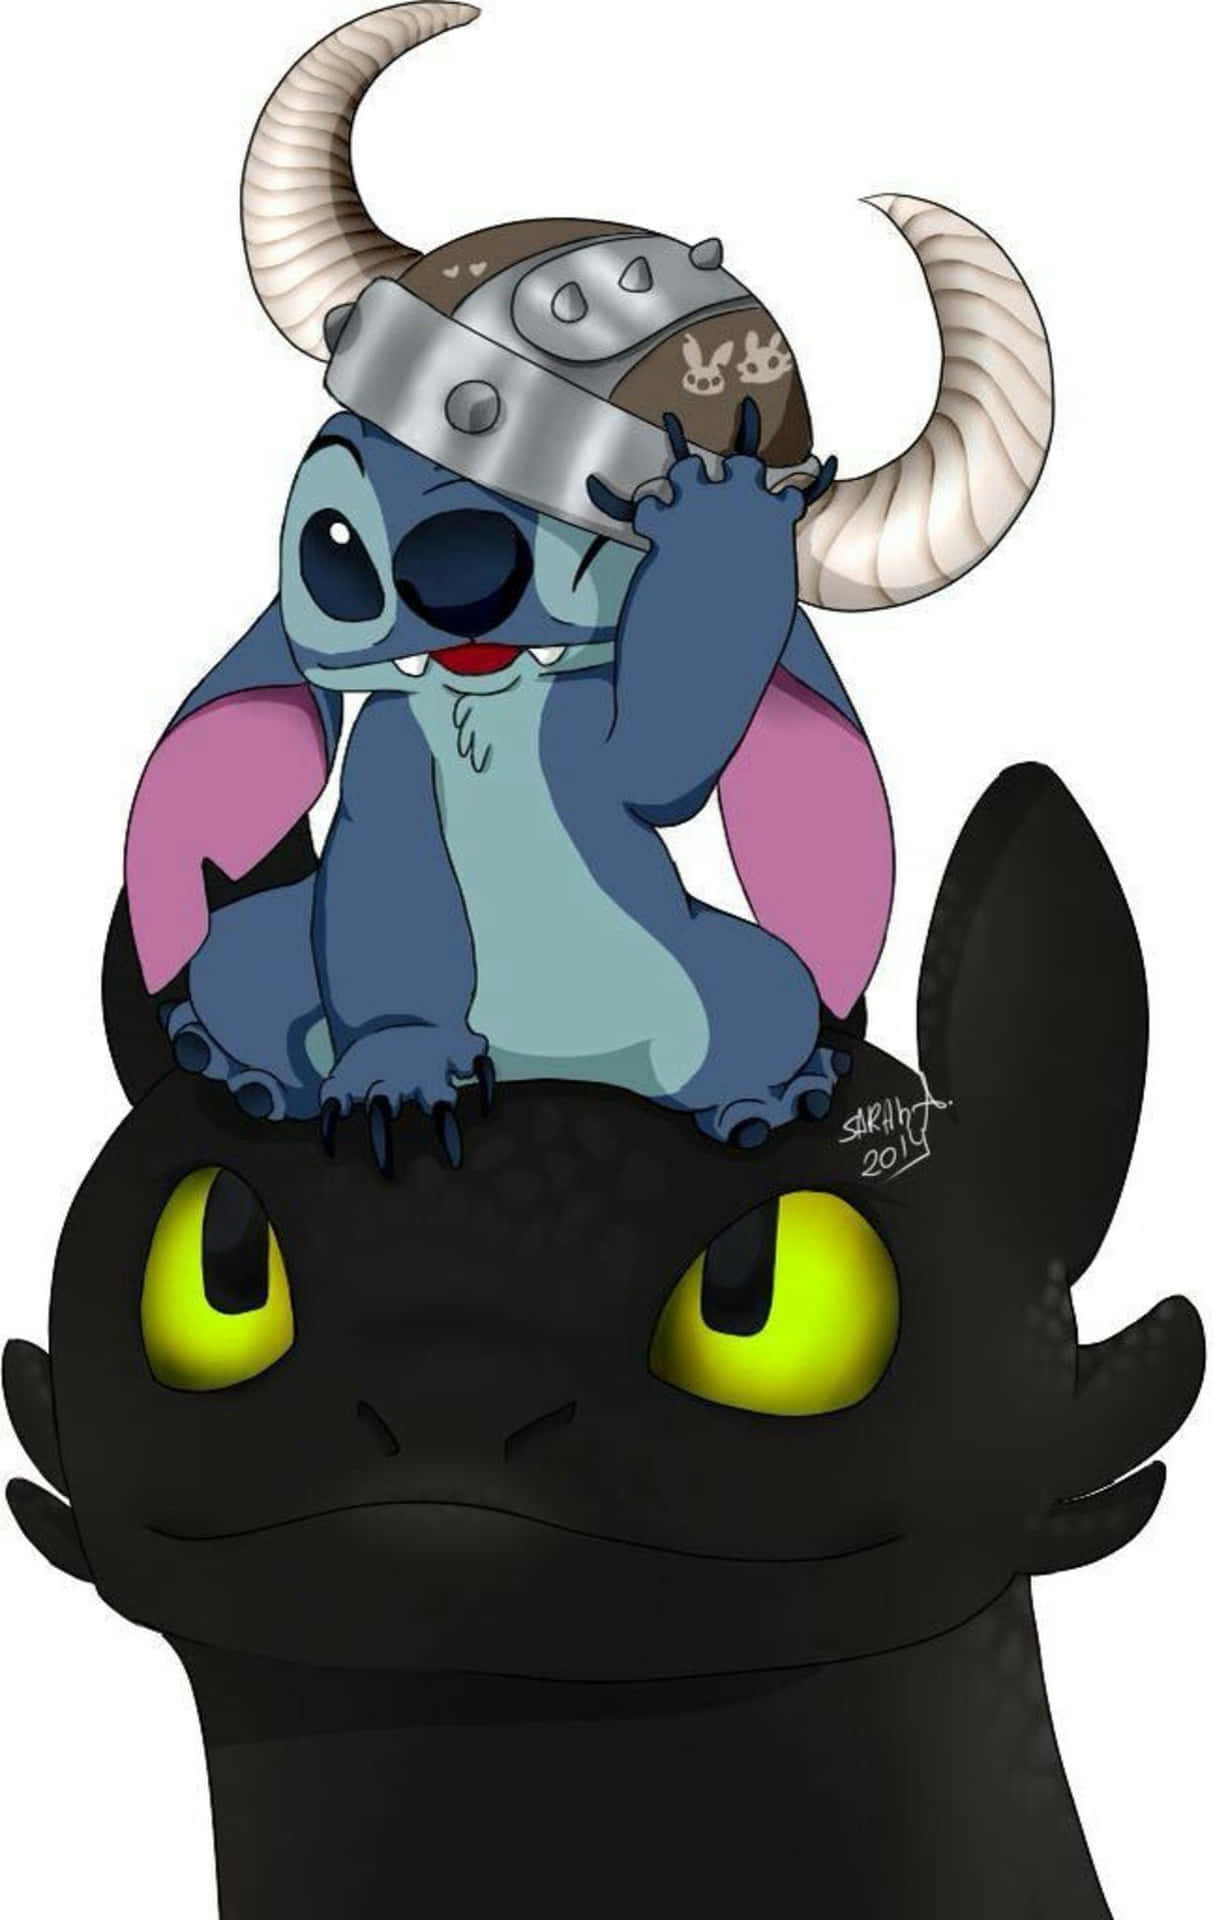 Toothless And Stitch Viking Helmet Wallpaper